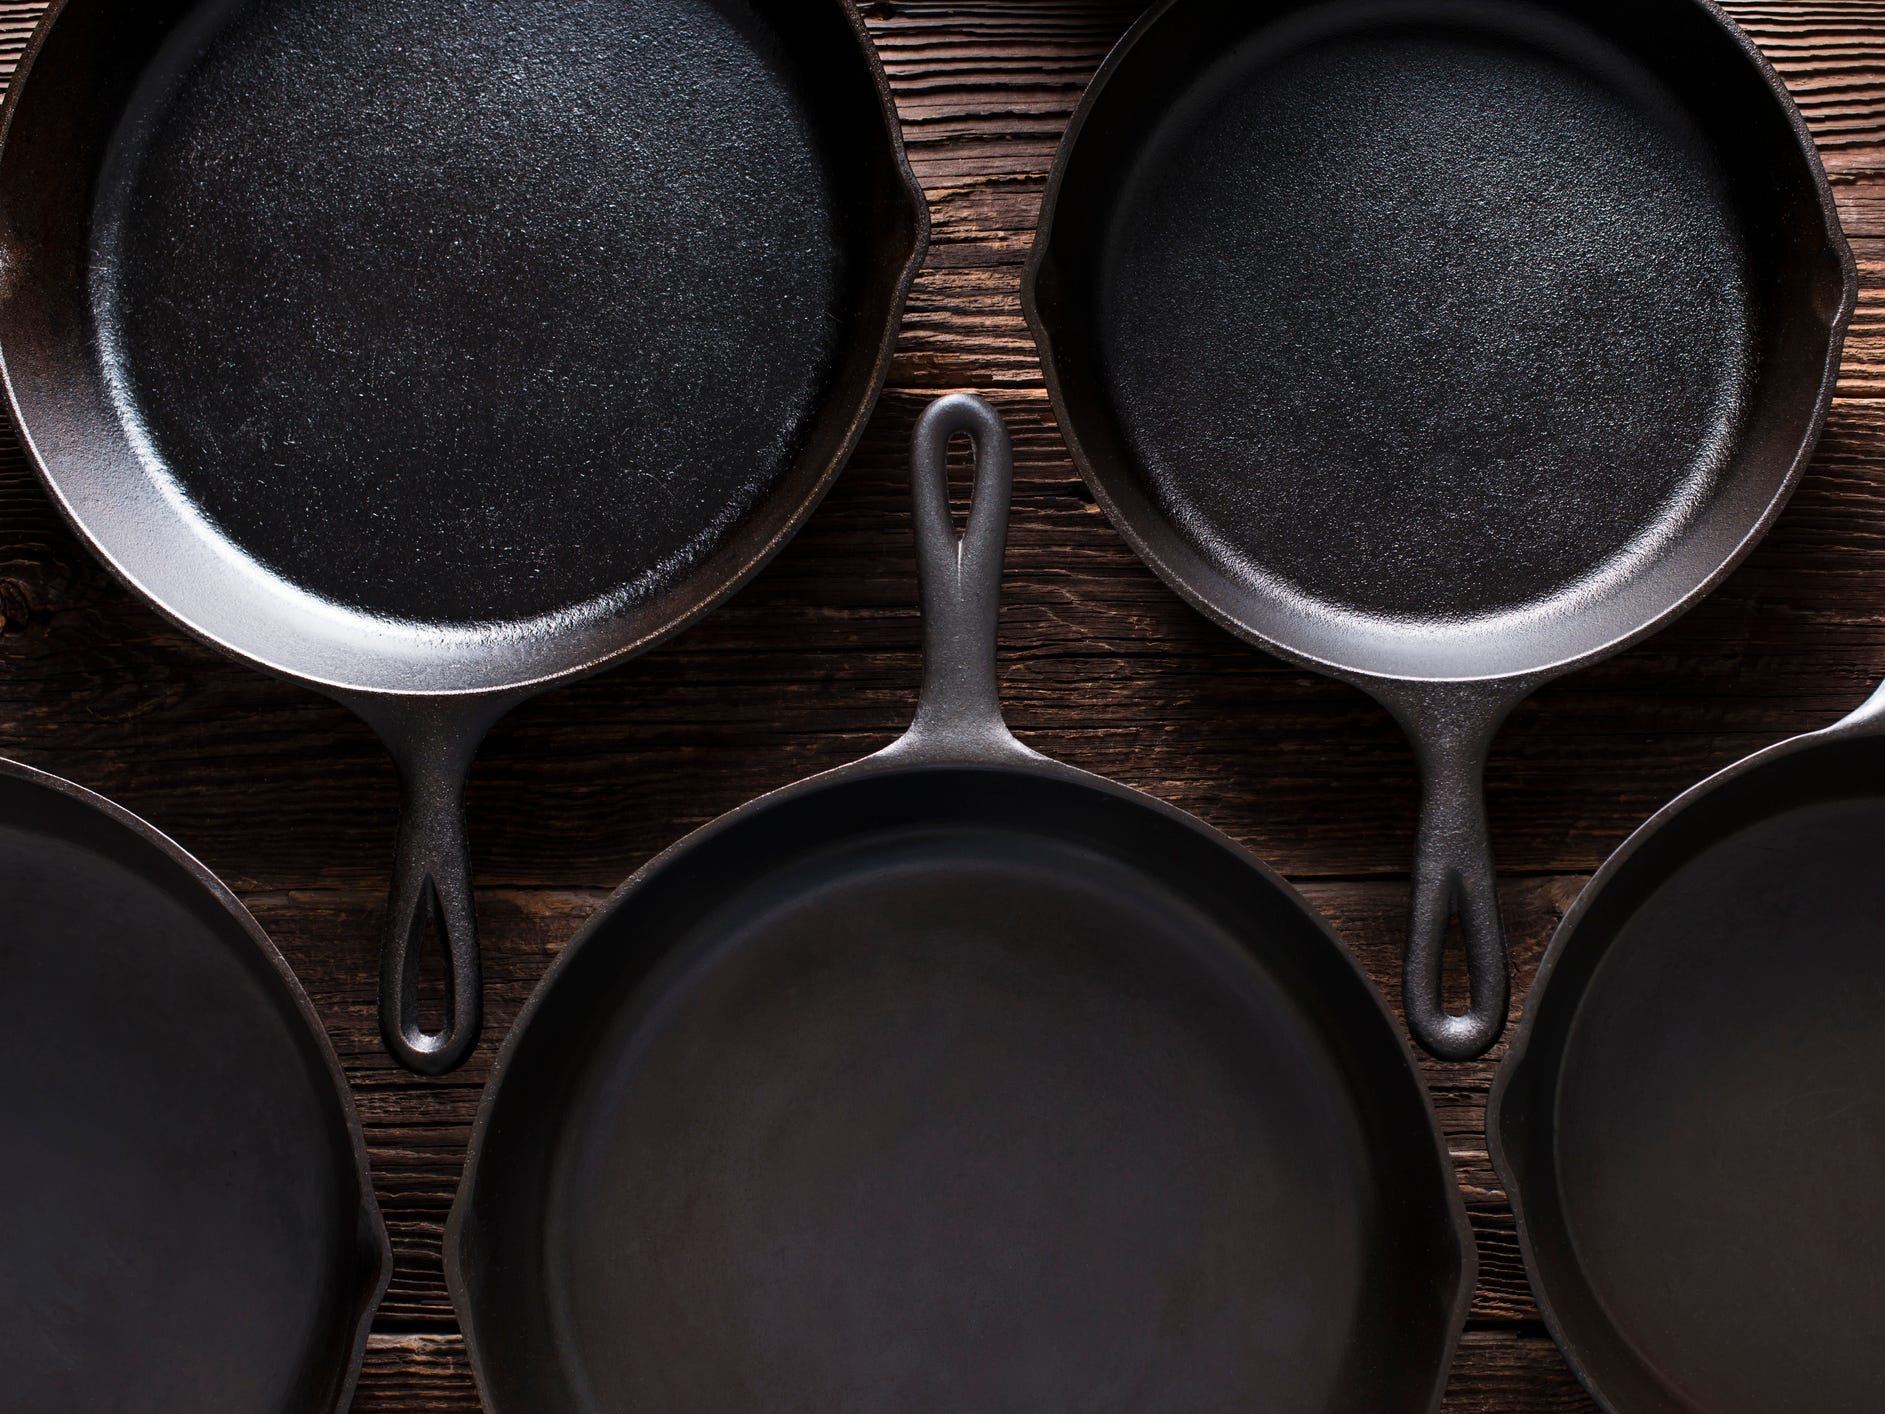 Five cast iron skillets against a dark wood background.